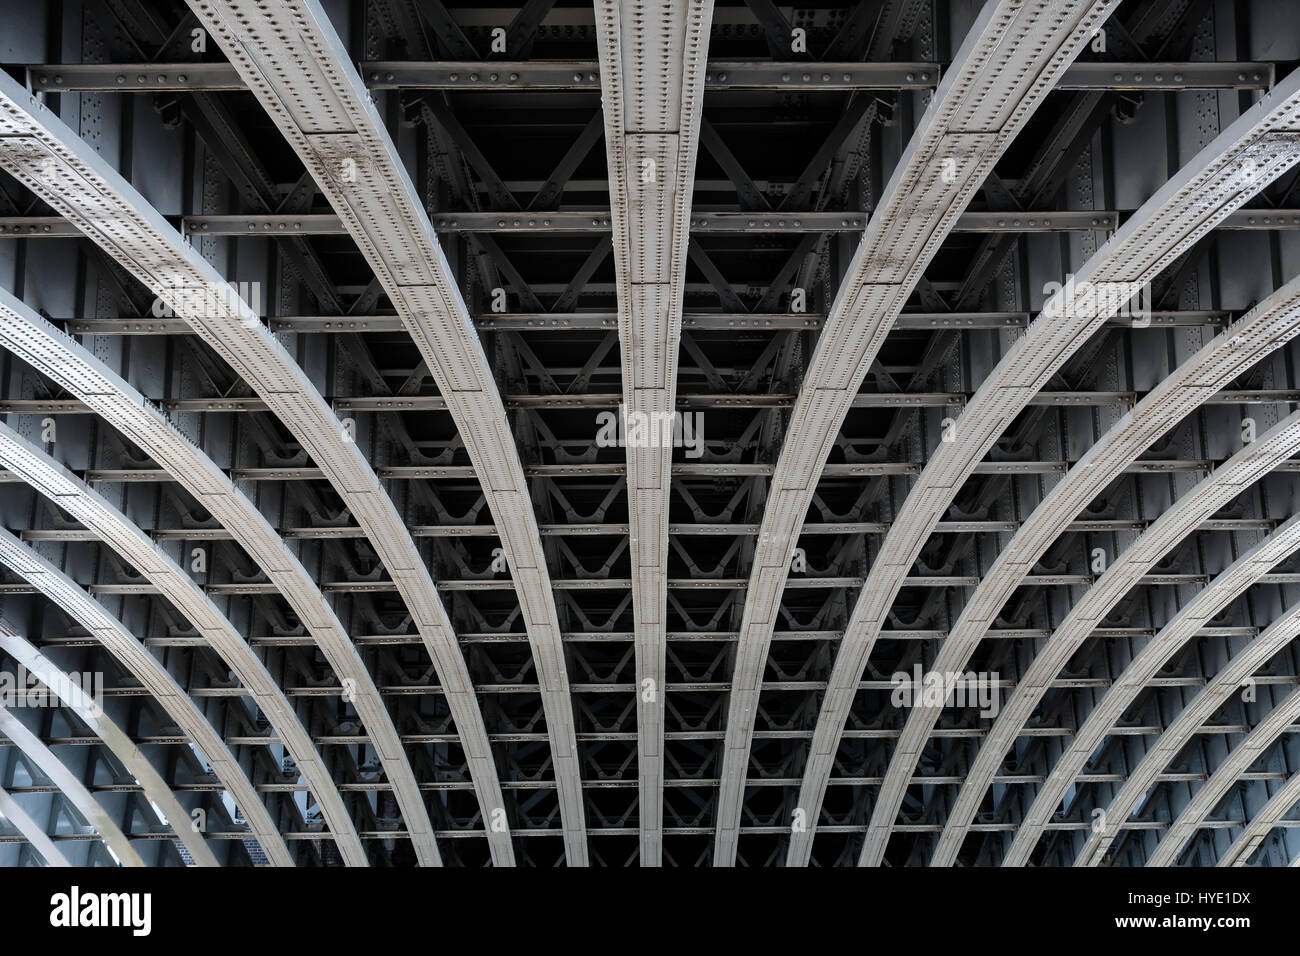 Detail of riveted steel beams supporting span of bridge crossing the River Thames Stock Photo